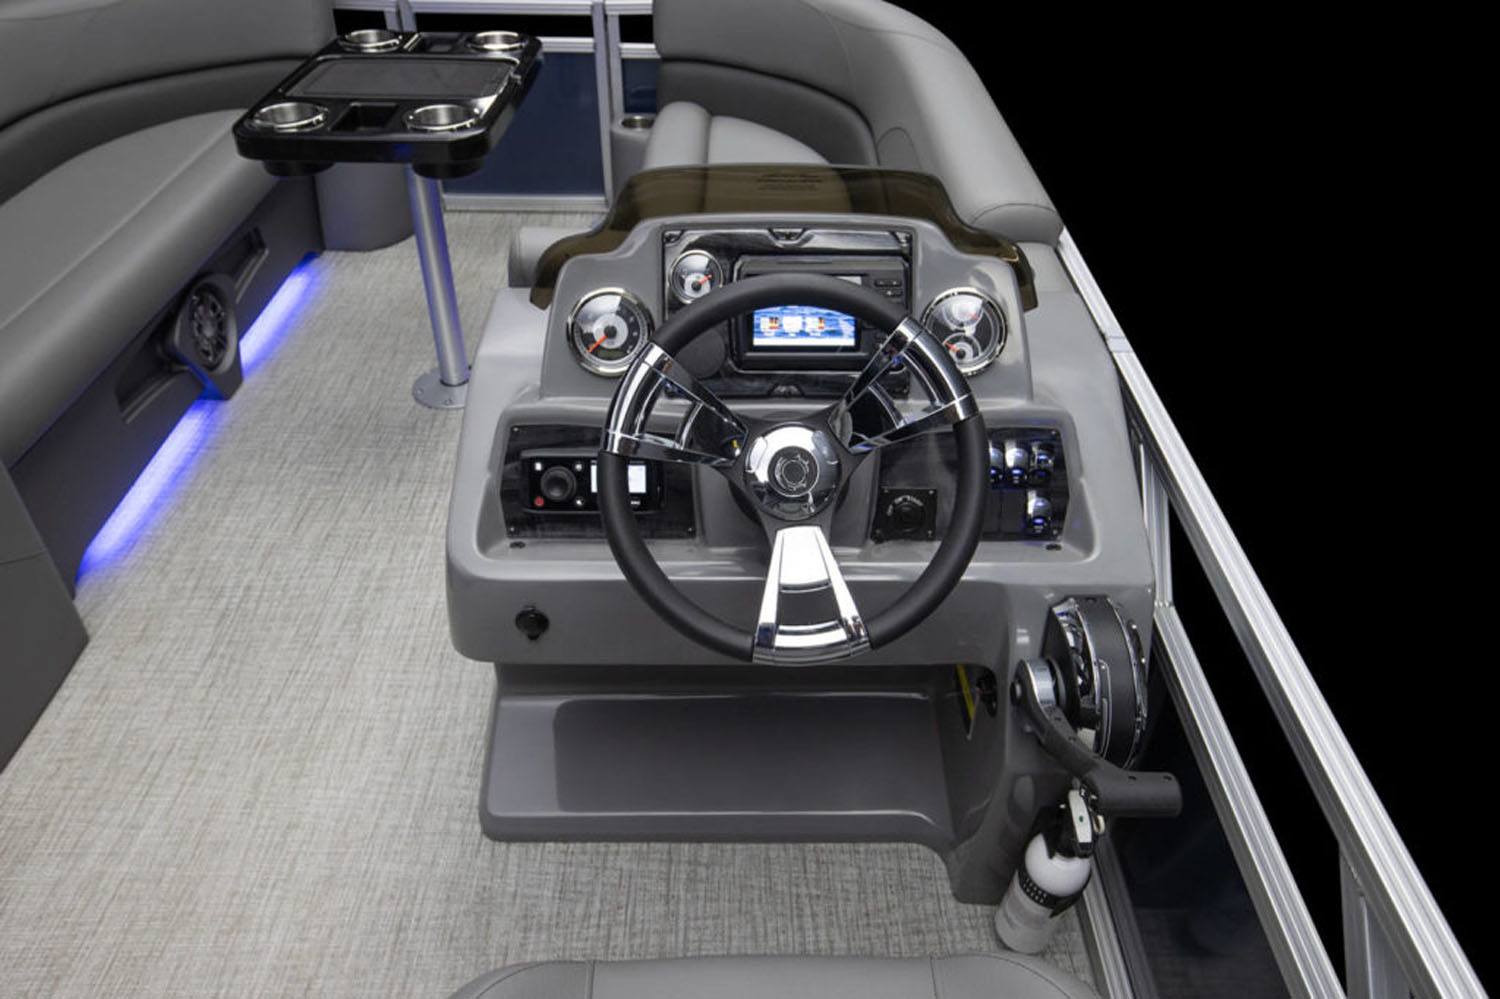 2022 Avalon VLS Quad Lounger - 22' in Memphis, Tennessee - Photo 5